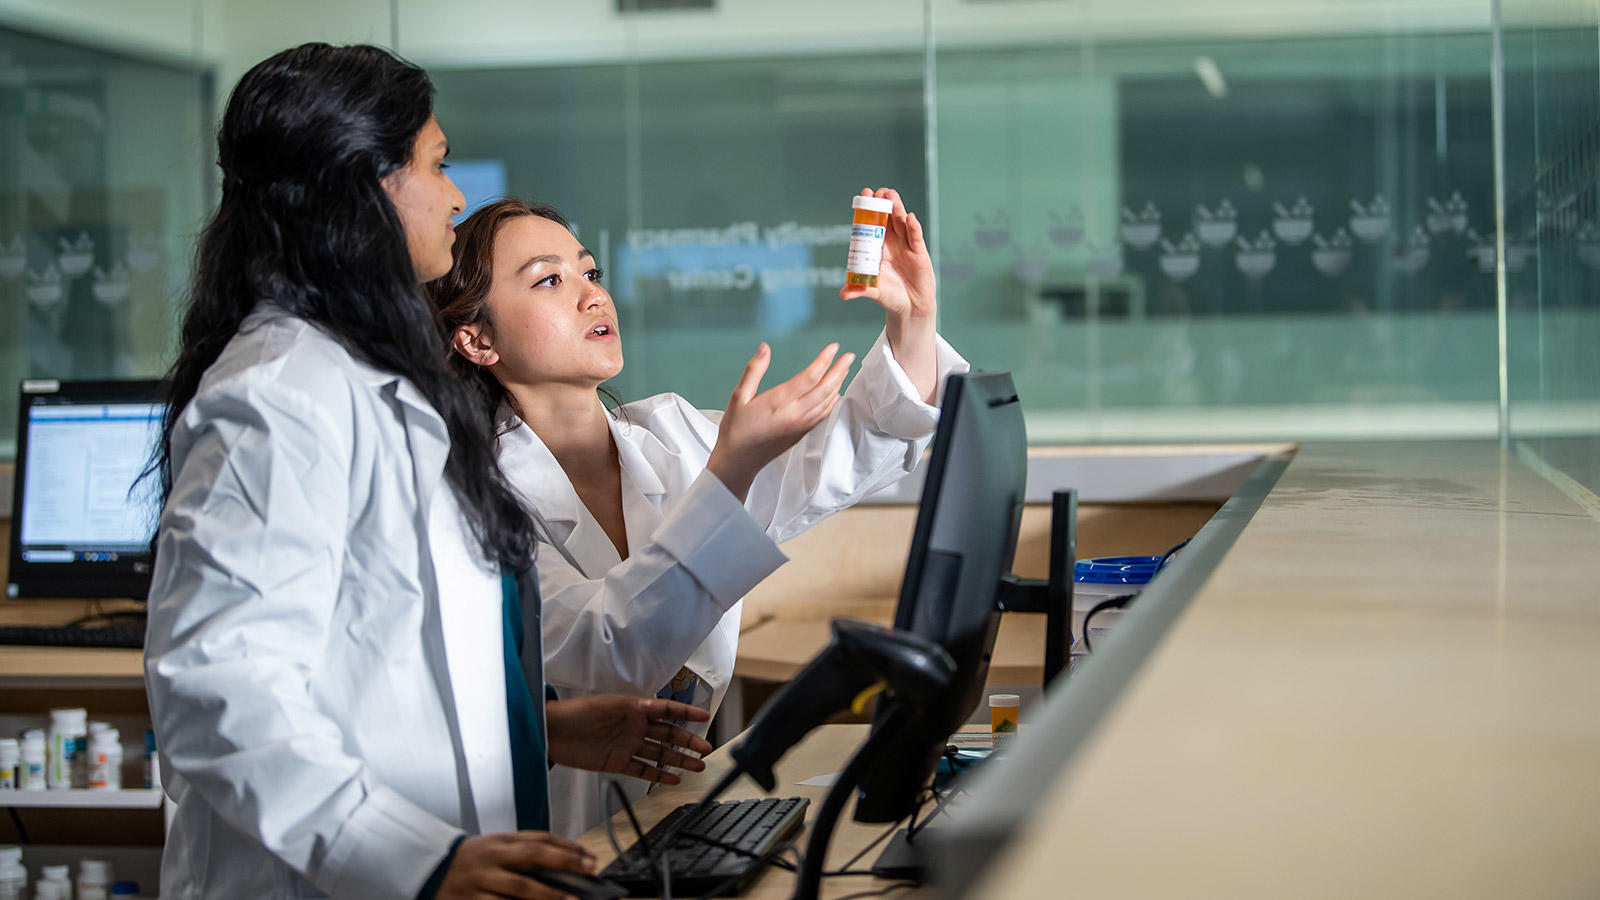 Students in white coats holding up a pill bottle in a pharmacy